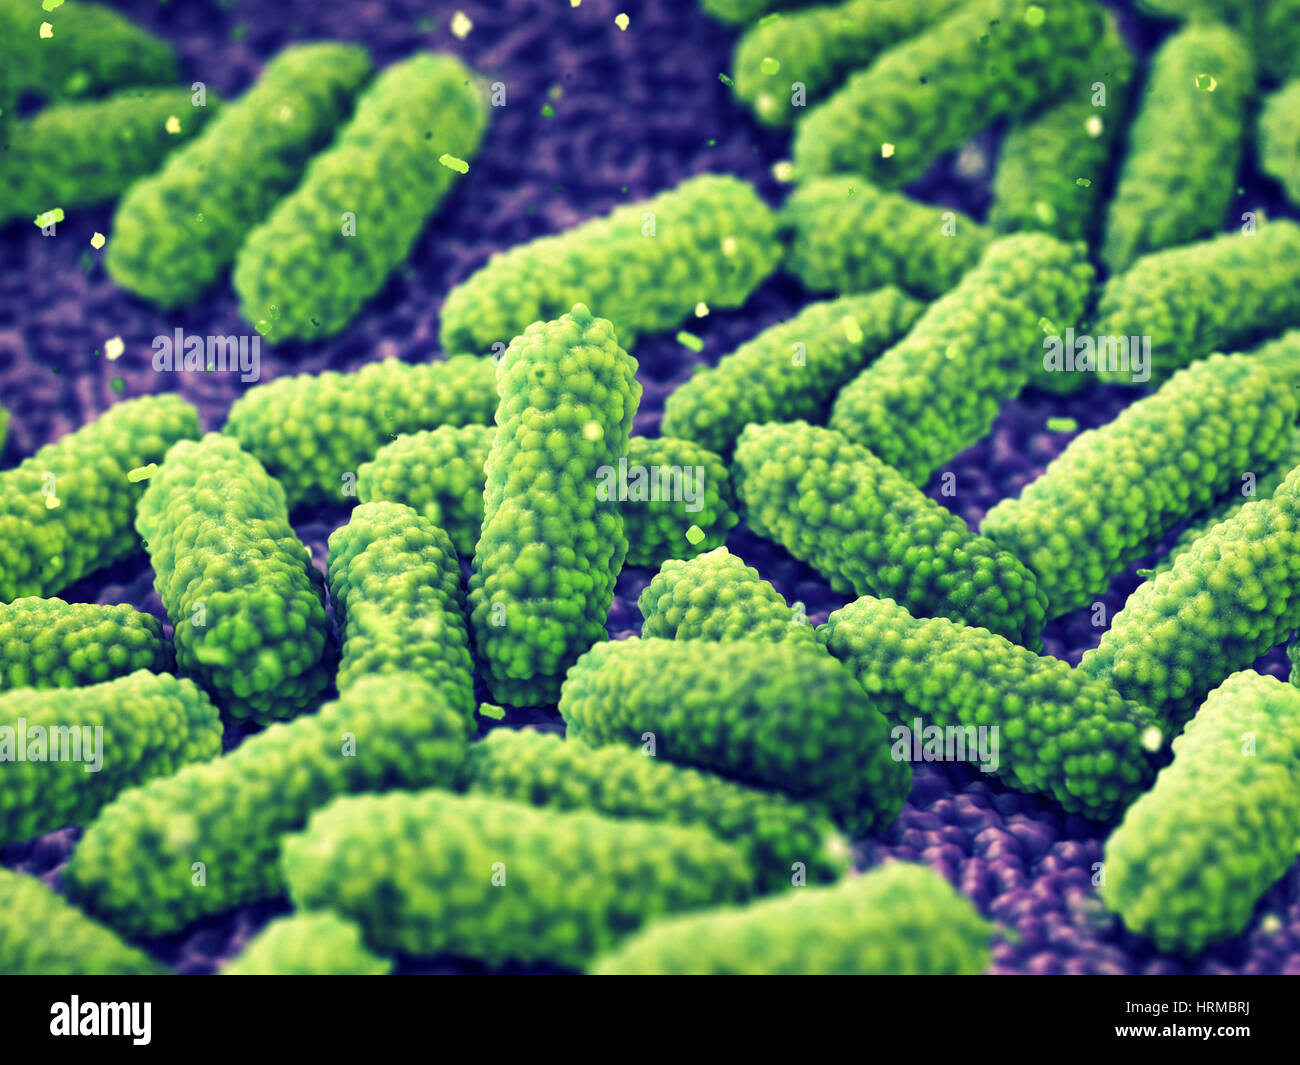 Bacteria , Germ infection and Pandemic disease Stock Photo